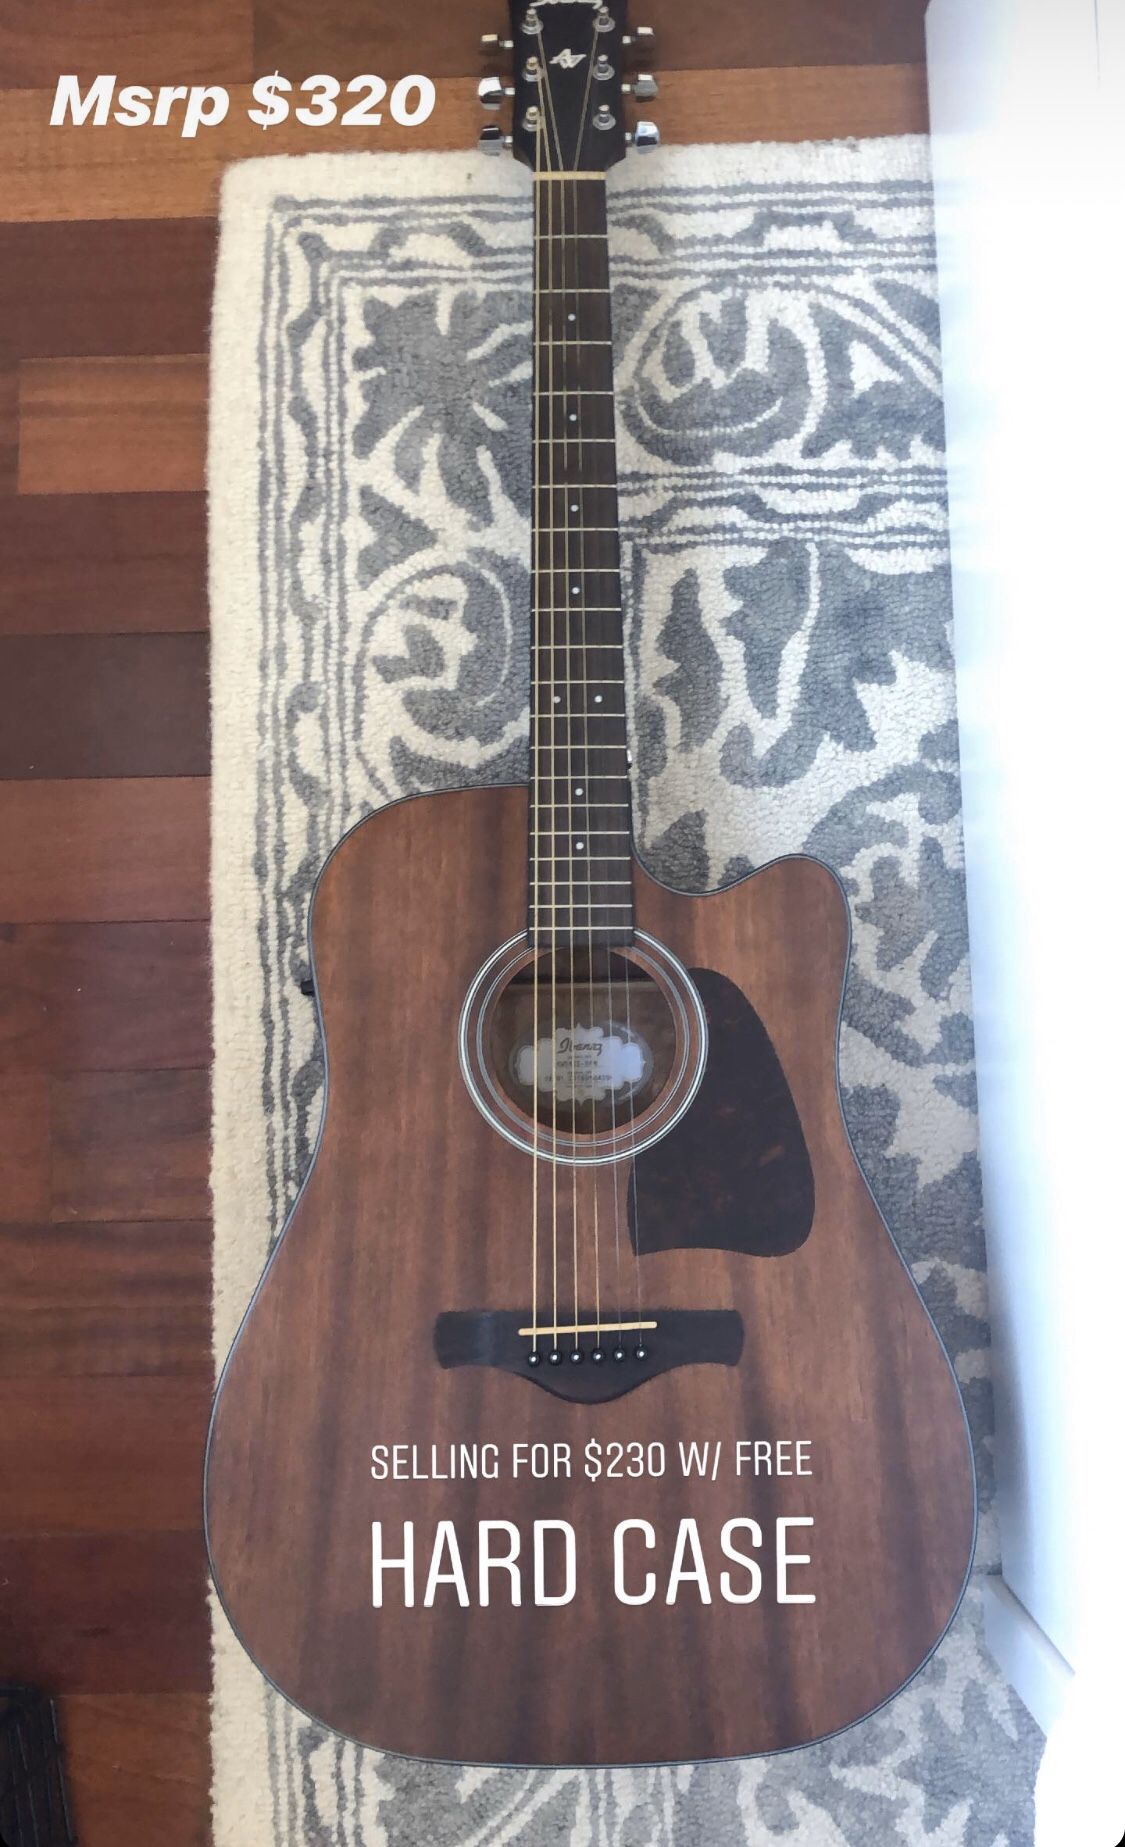 Ibanez electric acoustic guitar